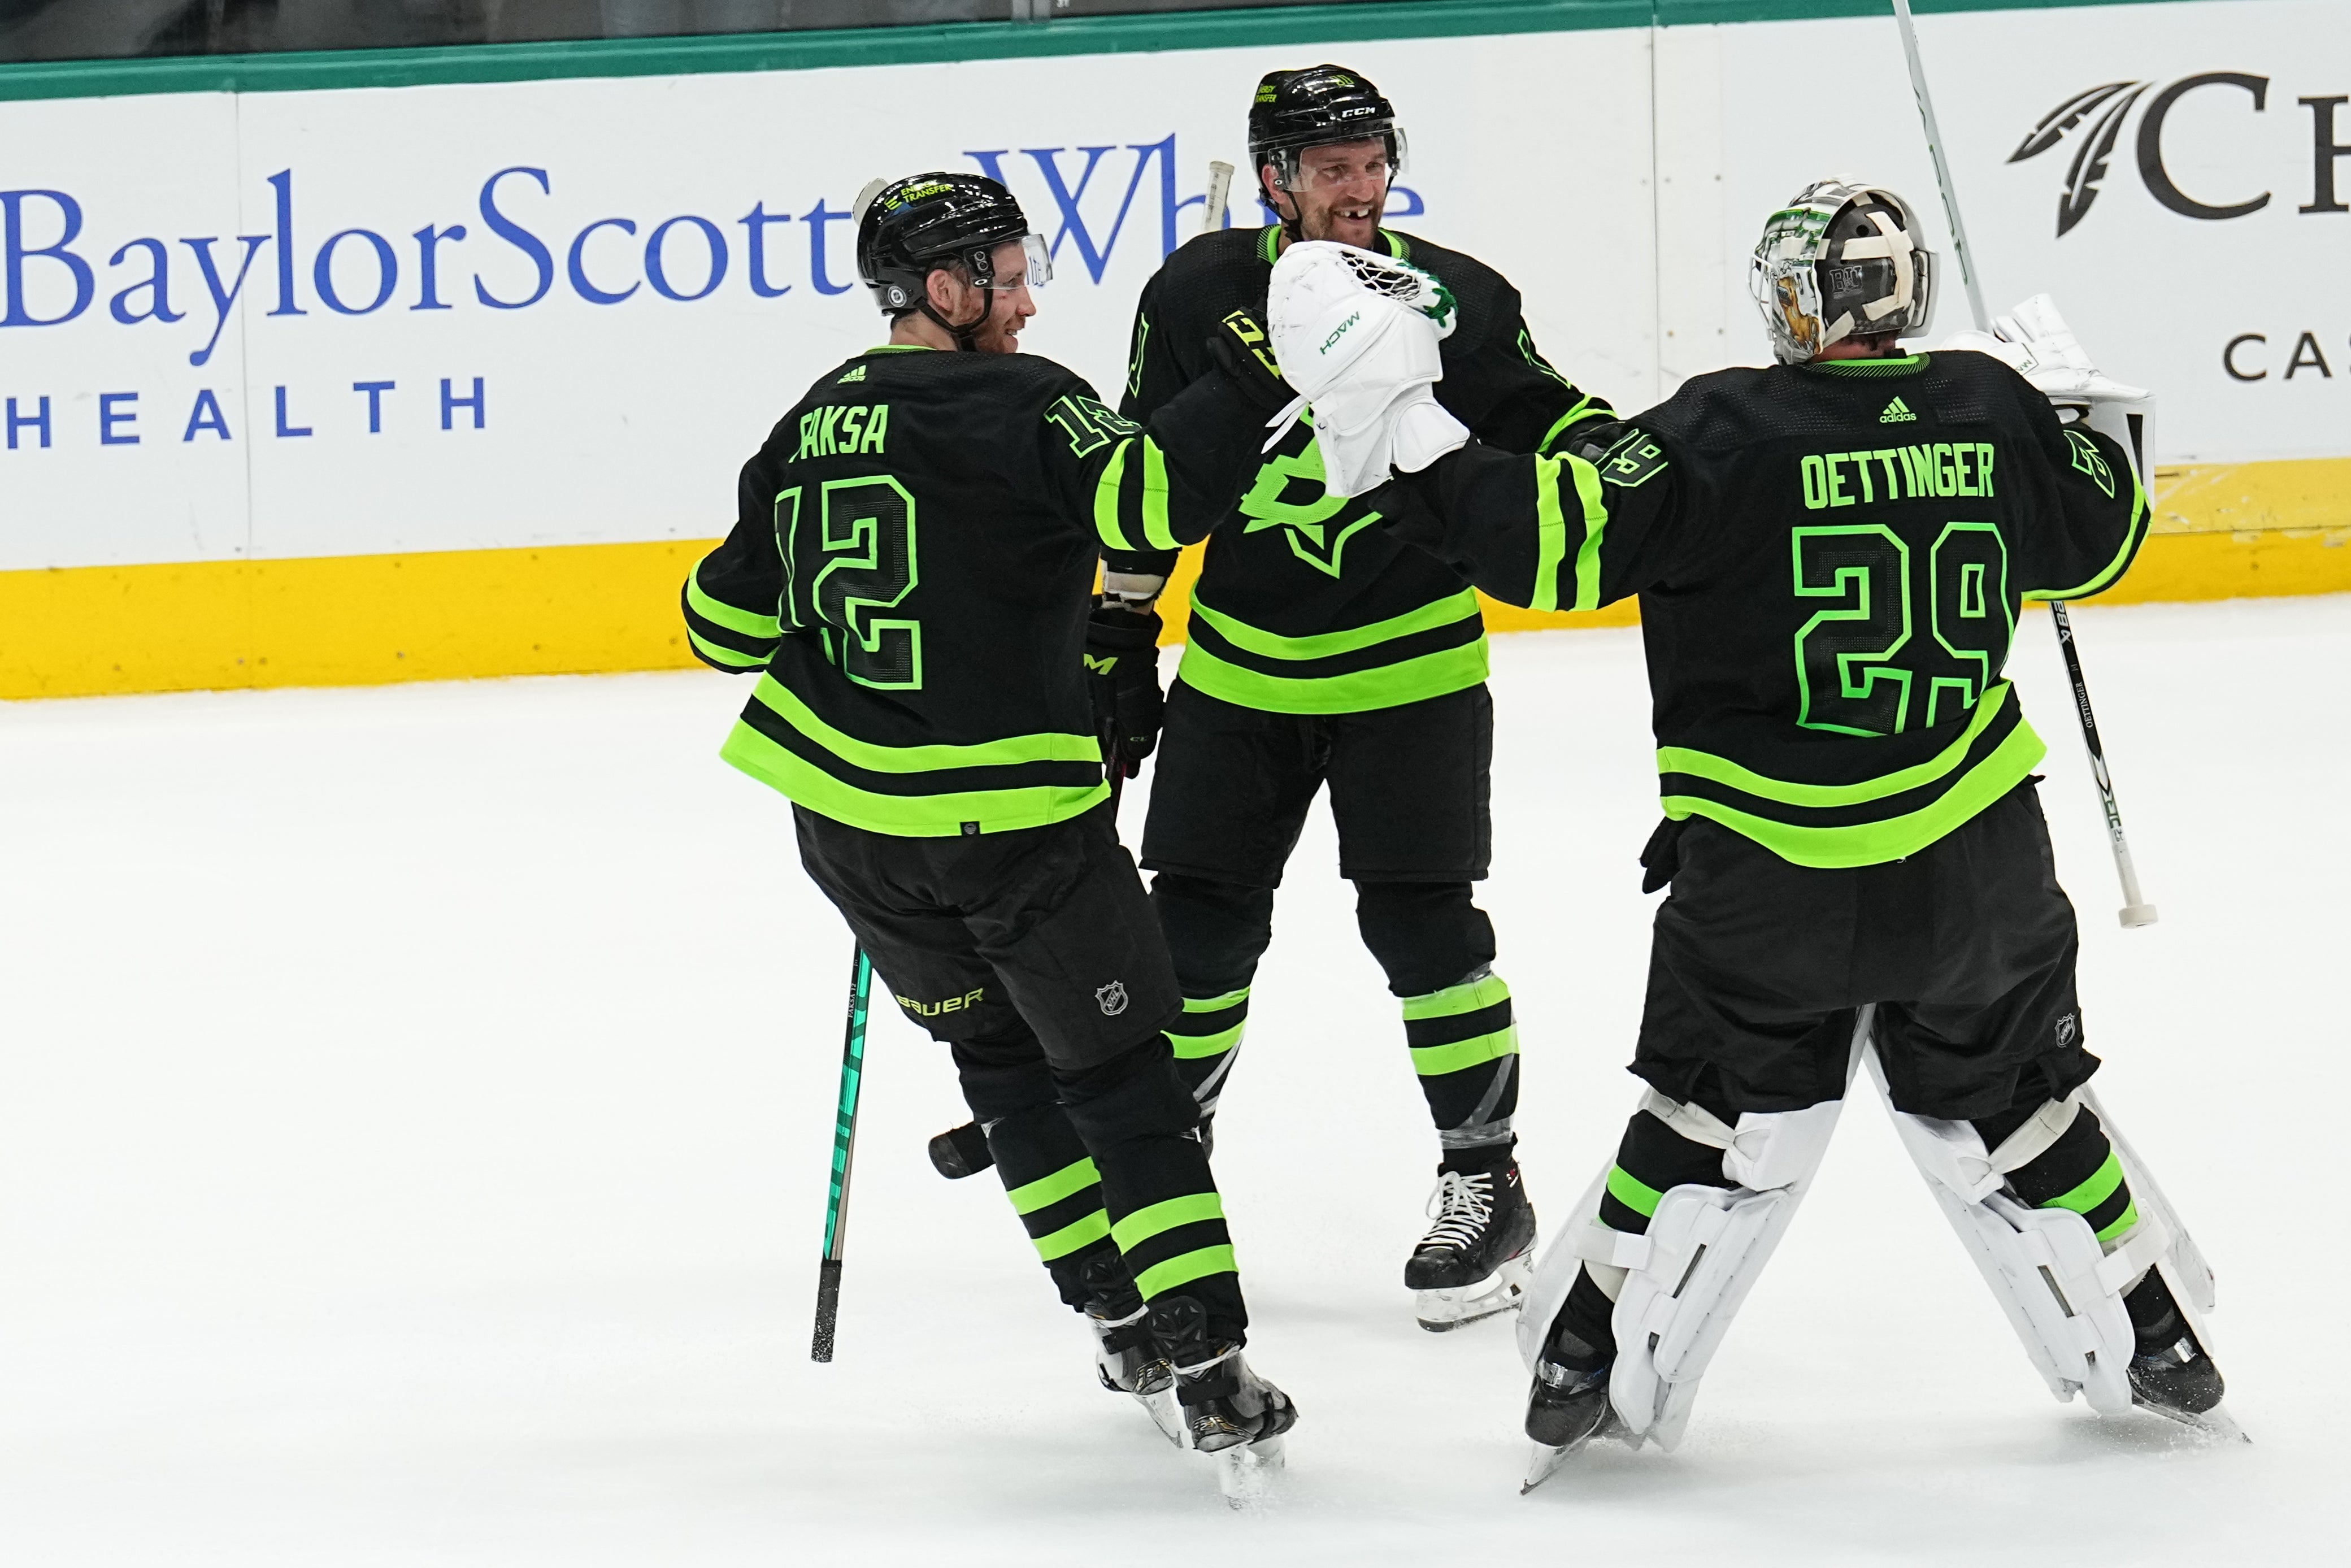 Stars Hangar - The Dallas Stars 2021-22 Blackout Jersey Auction is live.  Visit www.hangarhockey.com/collections/2021-22-game-worn-blackout-jerseys  to place your bid. The auction ends Sunday, June 5 at 8p central. DM us  with any questions